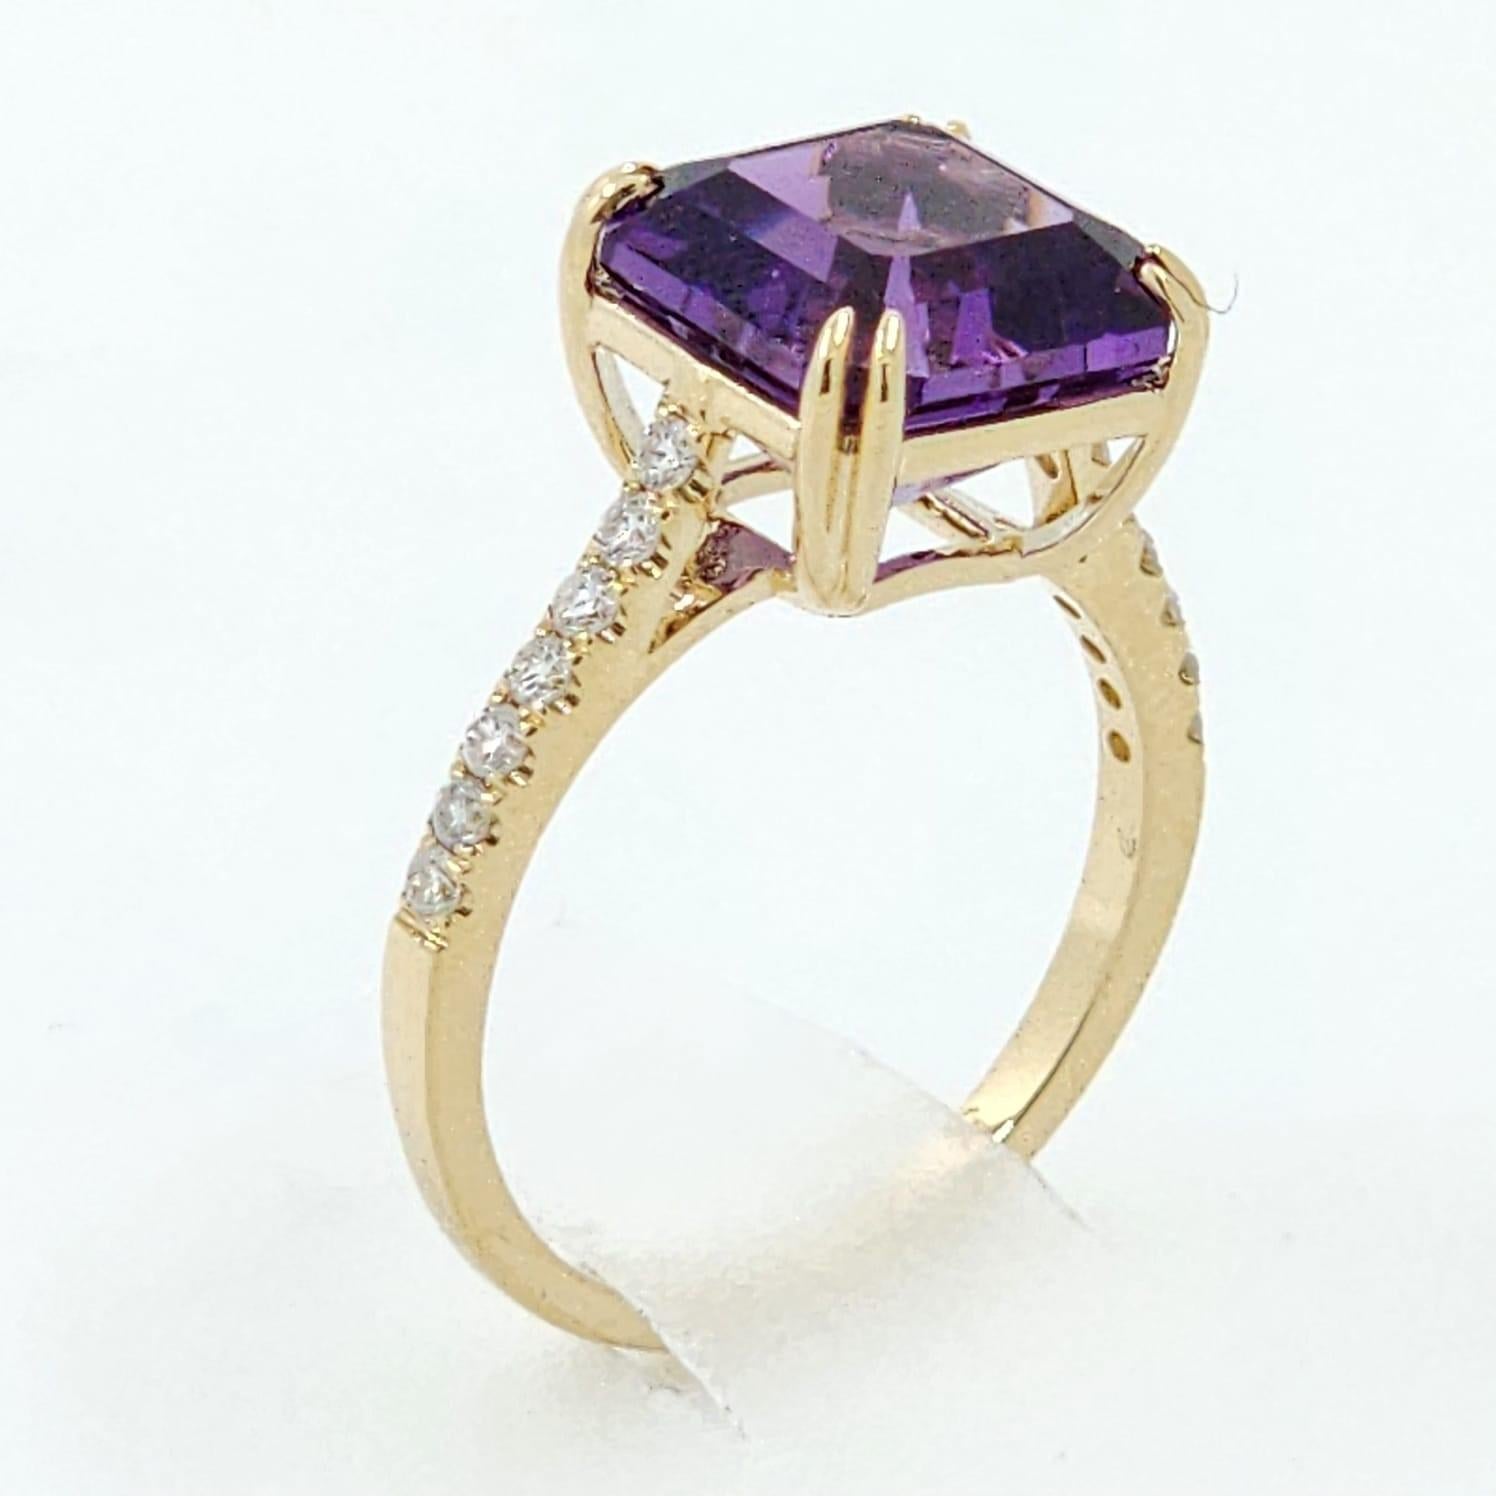 Square Cut 4.49Ct  Asscher Cut Amethyst Diamond Ring in 14K Yellow Gold For Sale